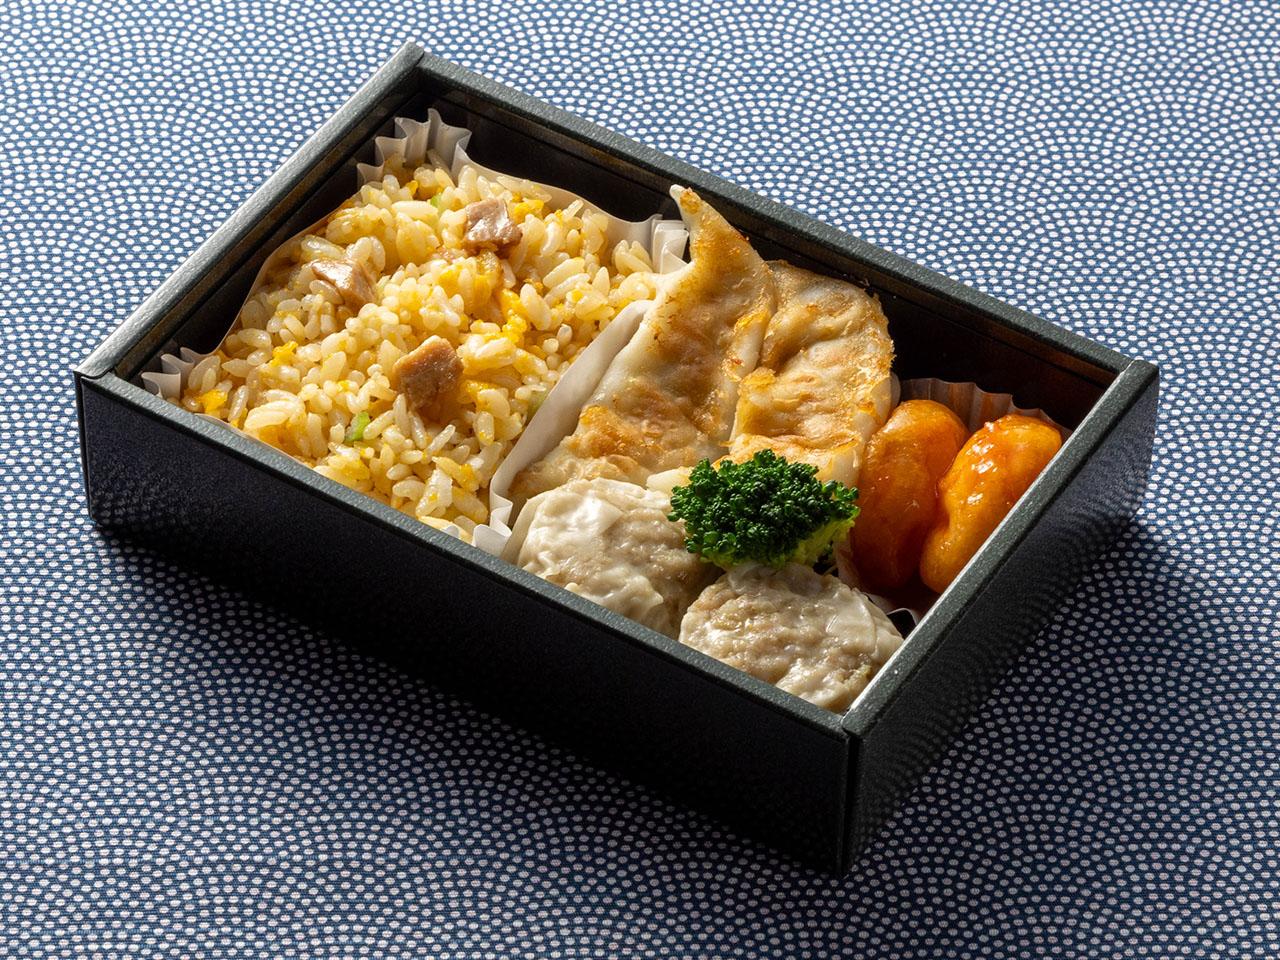 Photograph of in-flight meal Chinese Box ～Japanese Style～